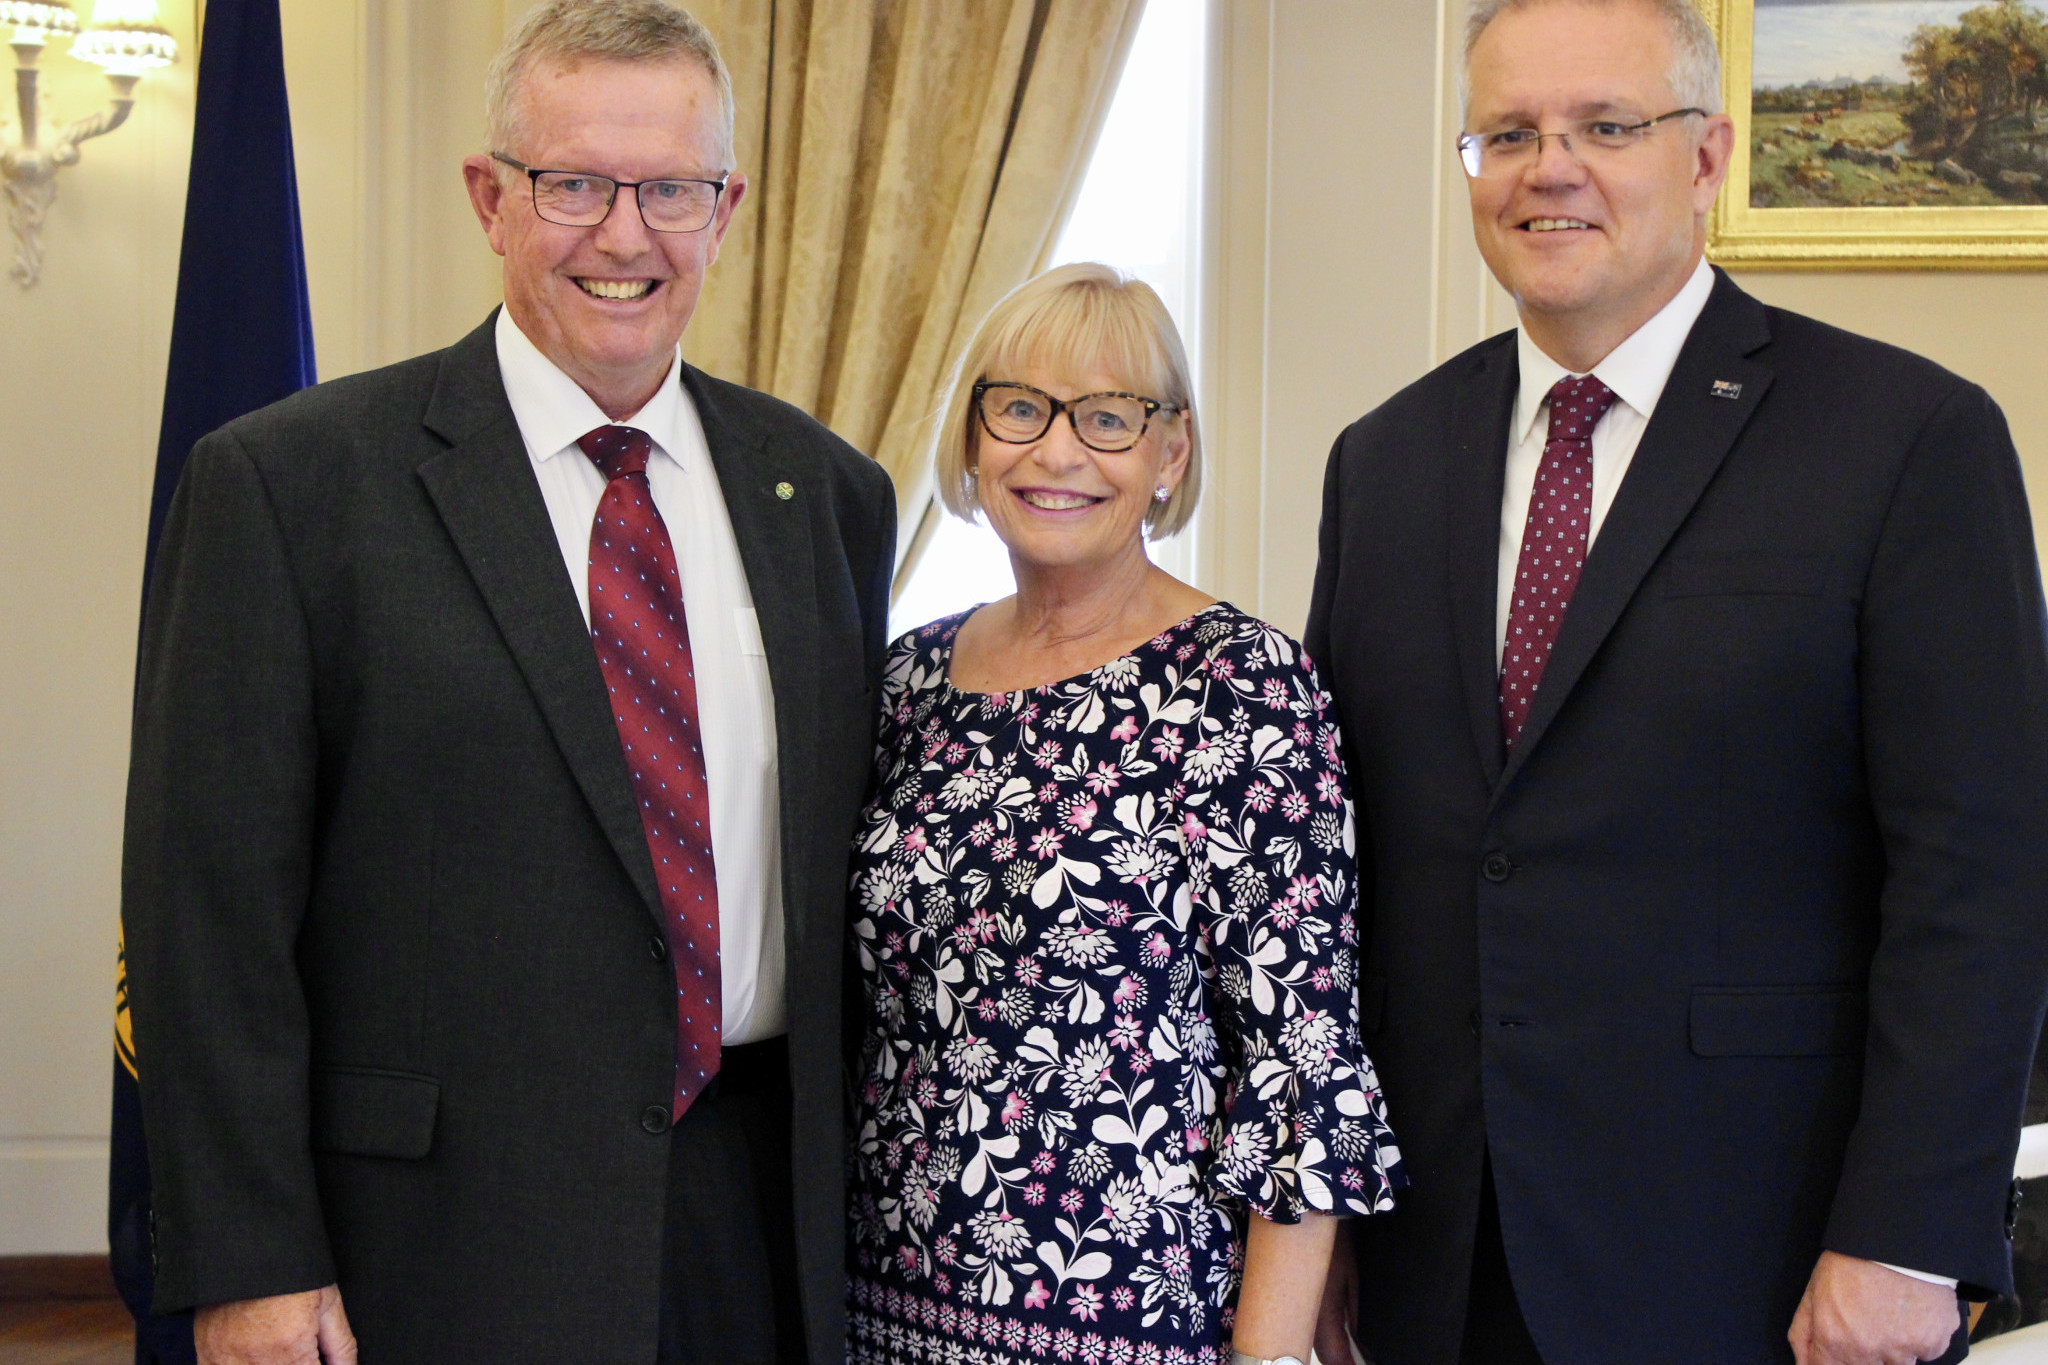 Federal member for Parkes Mark Coulton and his wife Robyn Coulton with then prime minister Scott Morrison at government house. Photo by Parkes Electorate.